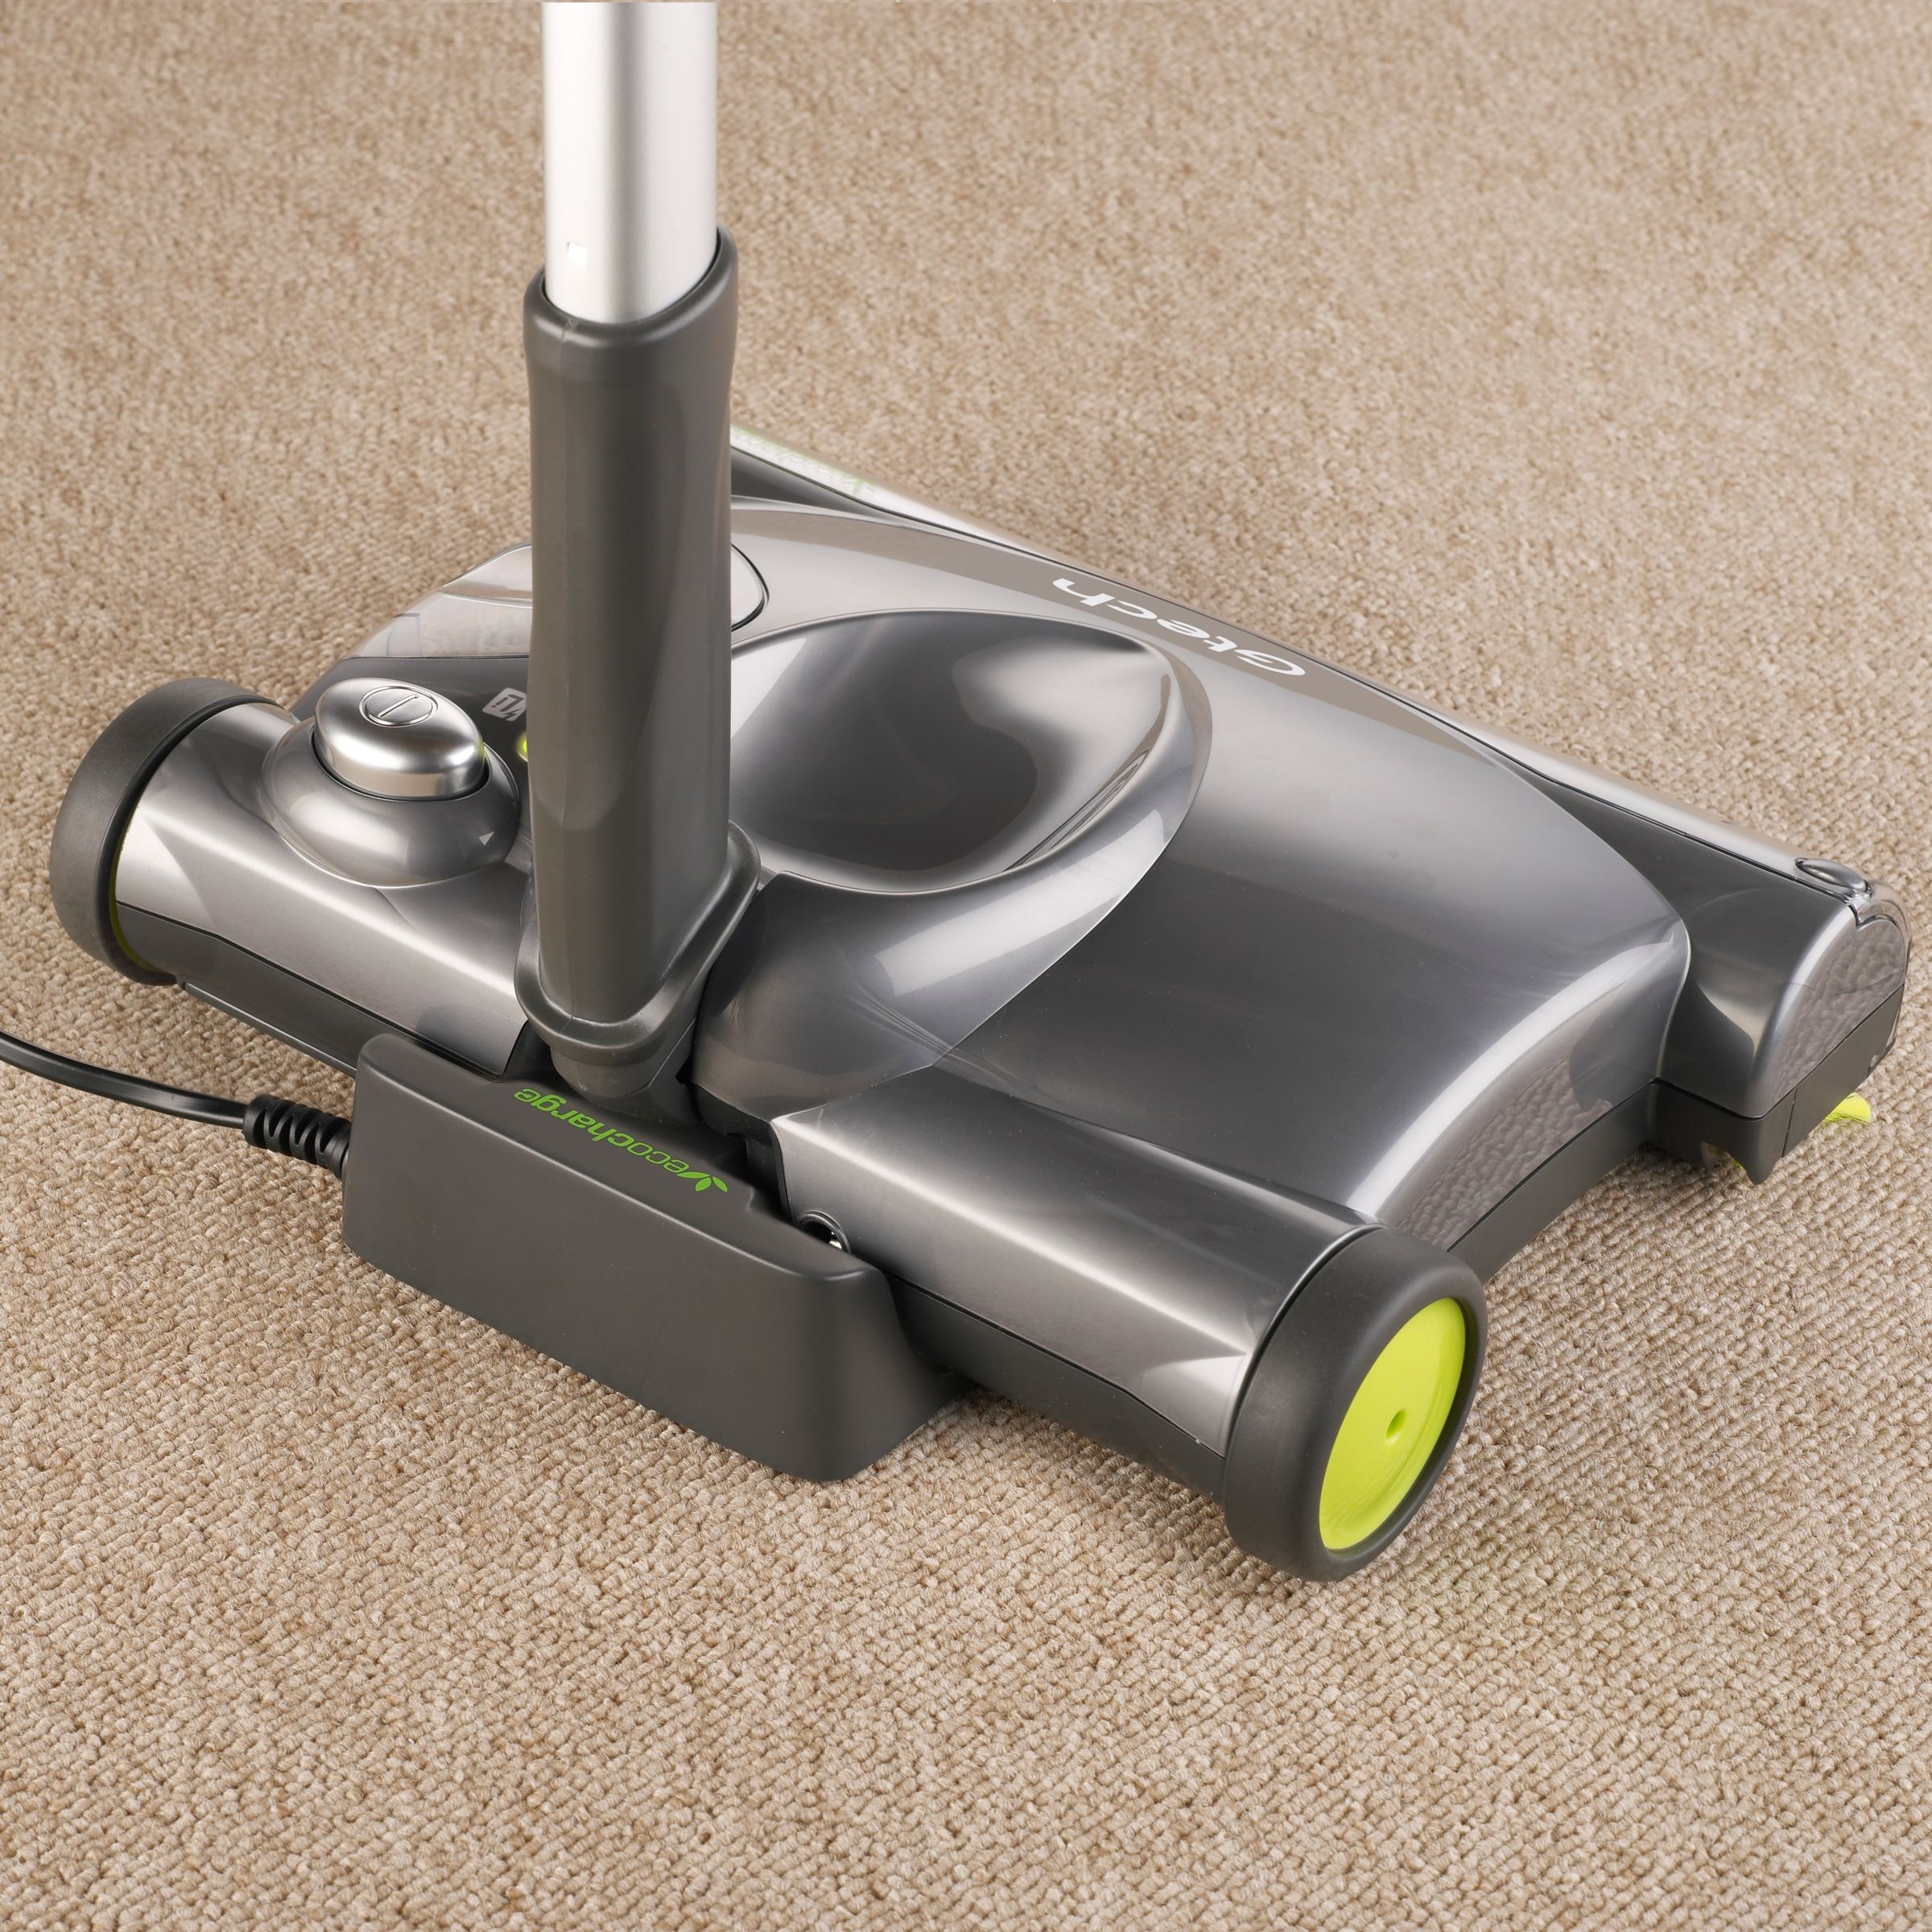 Gtech Sweeper Sw22 Vacuum Cleaner At John Lewis Partners